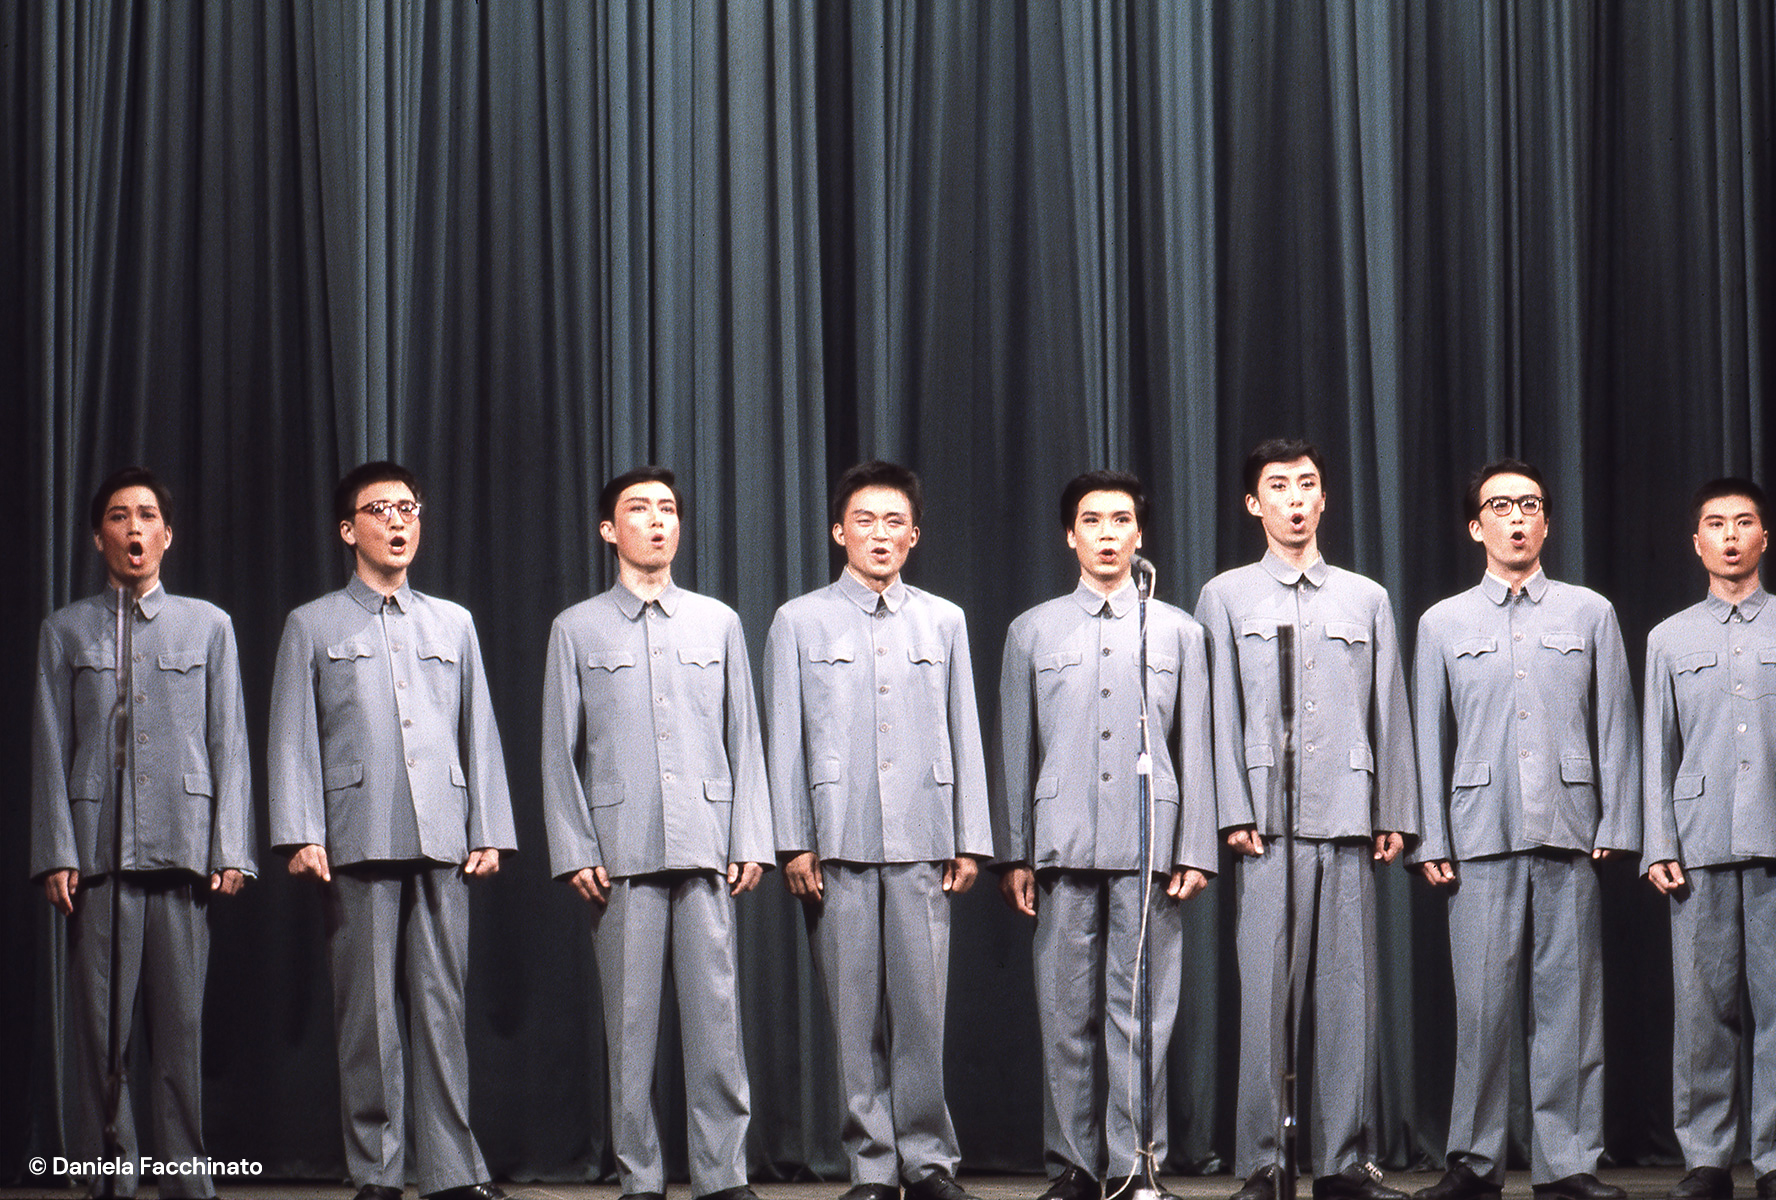 Whuan, 1976. Choir during a theatrical performance in honor of the Italian guests